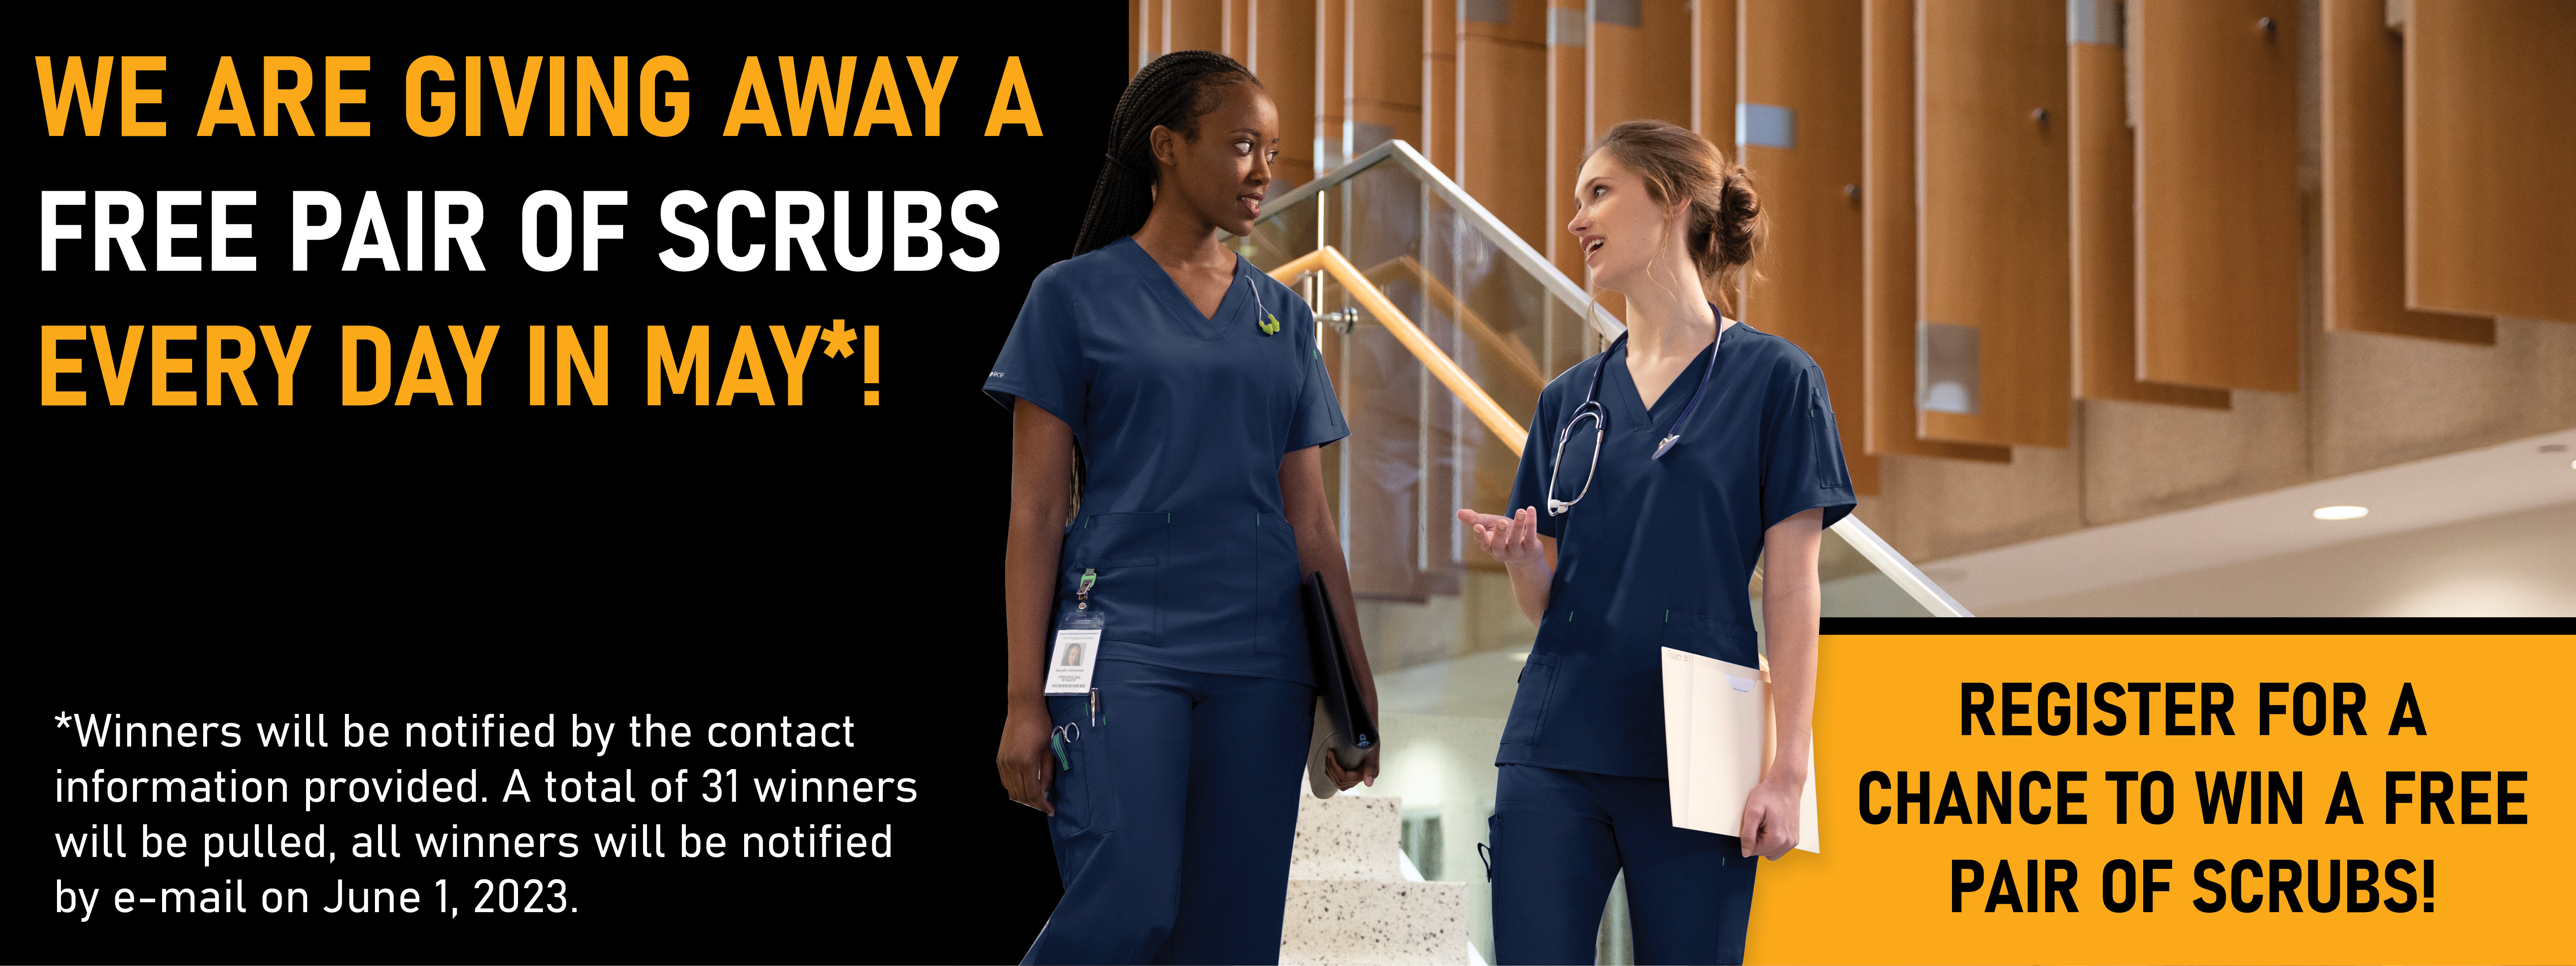 May Scrubs Giveaway Register to Win